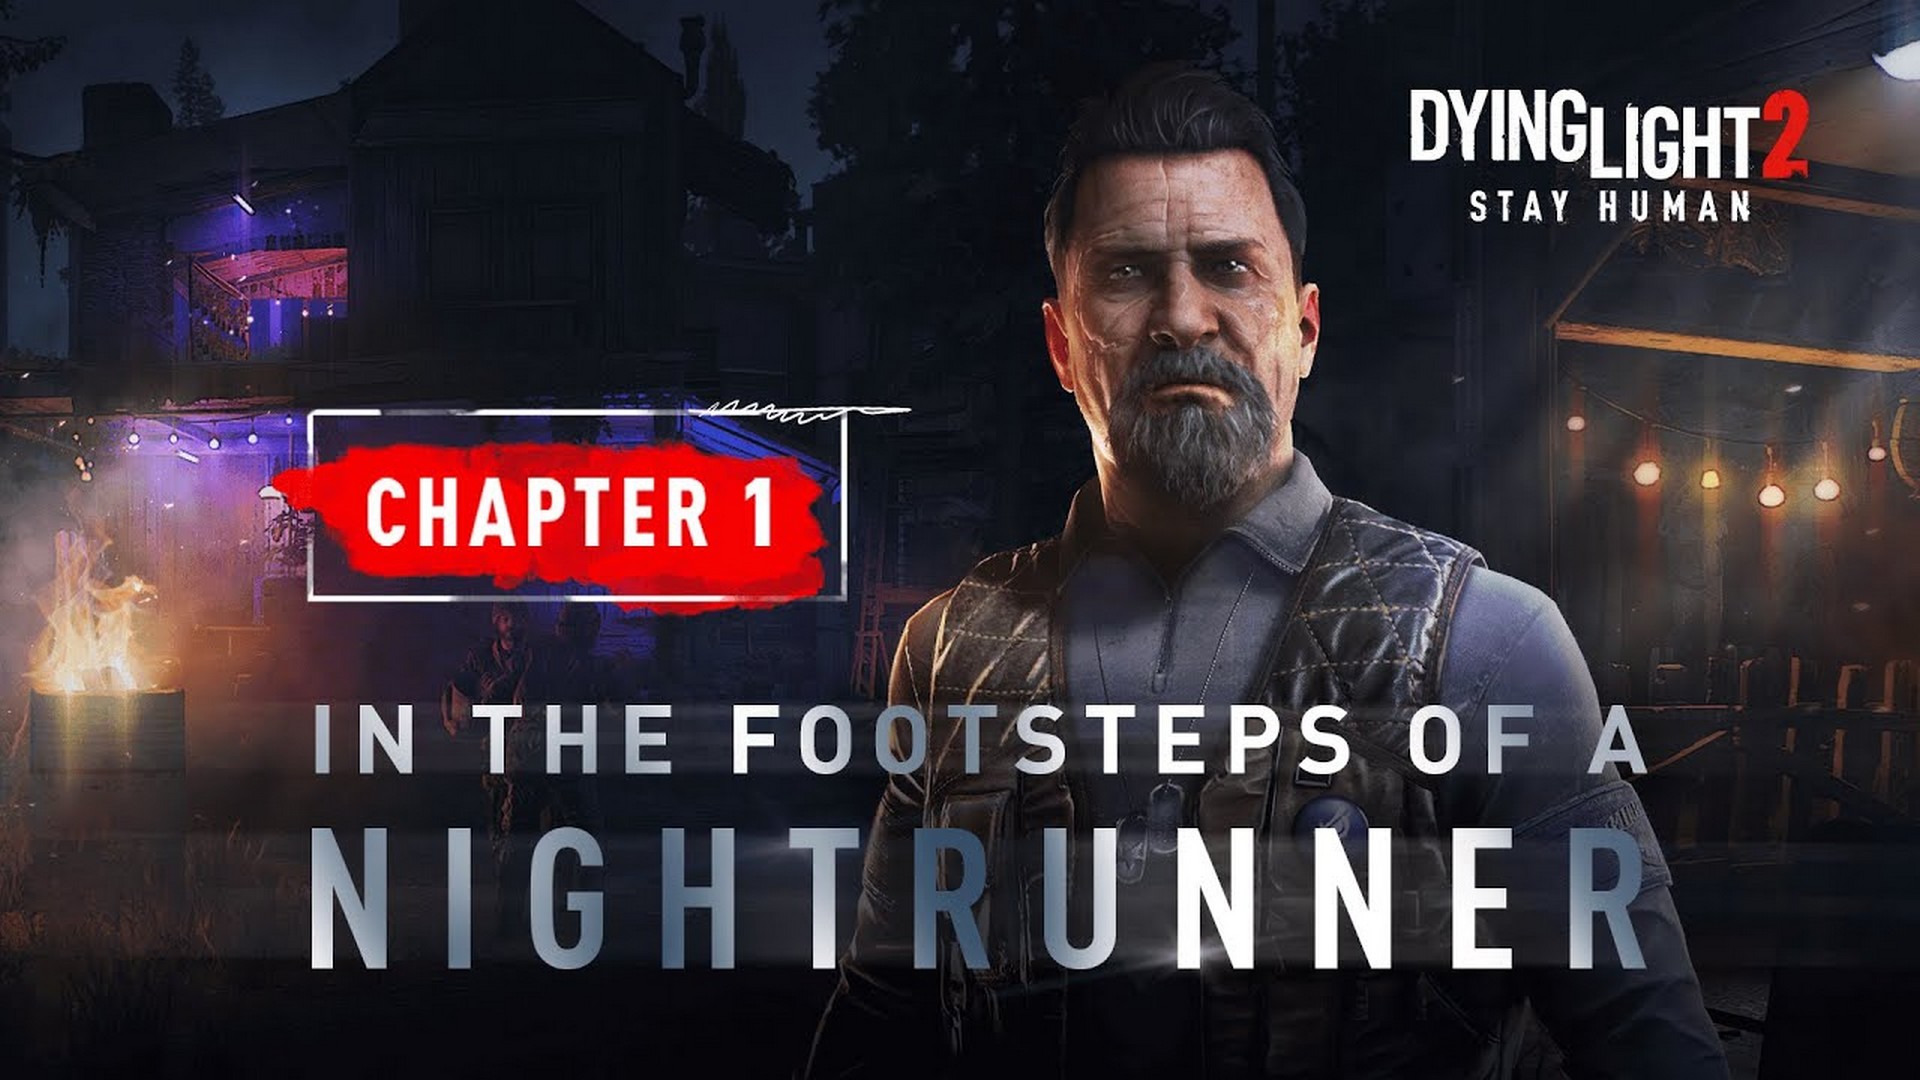 Dying Light 2 Free Gameplay Chapter Adds New Progression System, Recurring Quests; Patch 1.4 Debuts Photo Mode